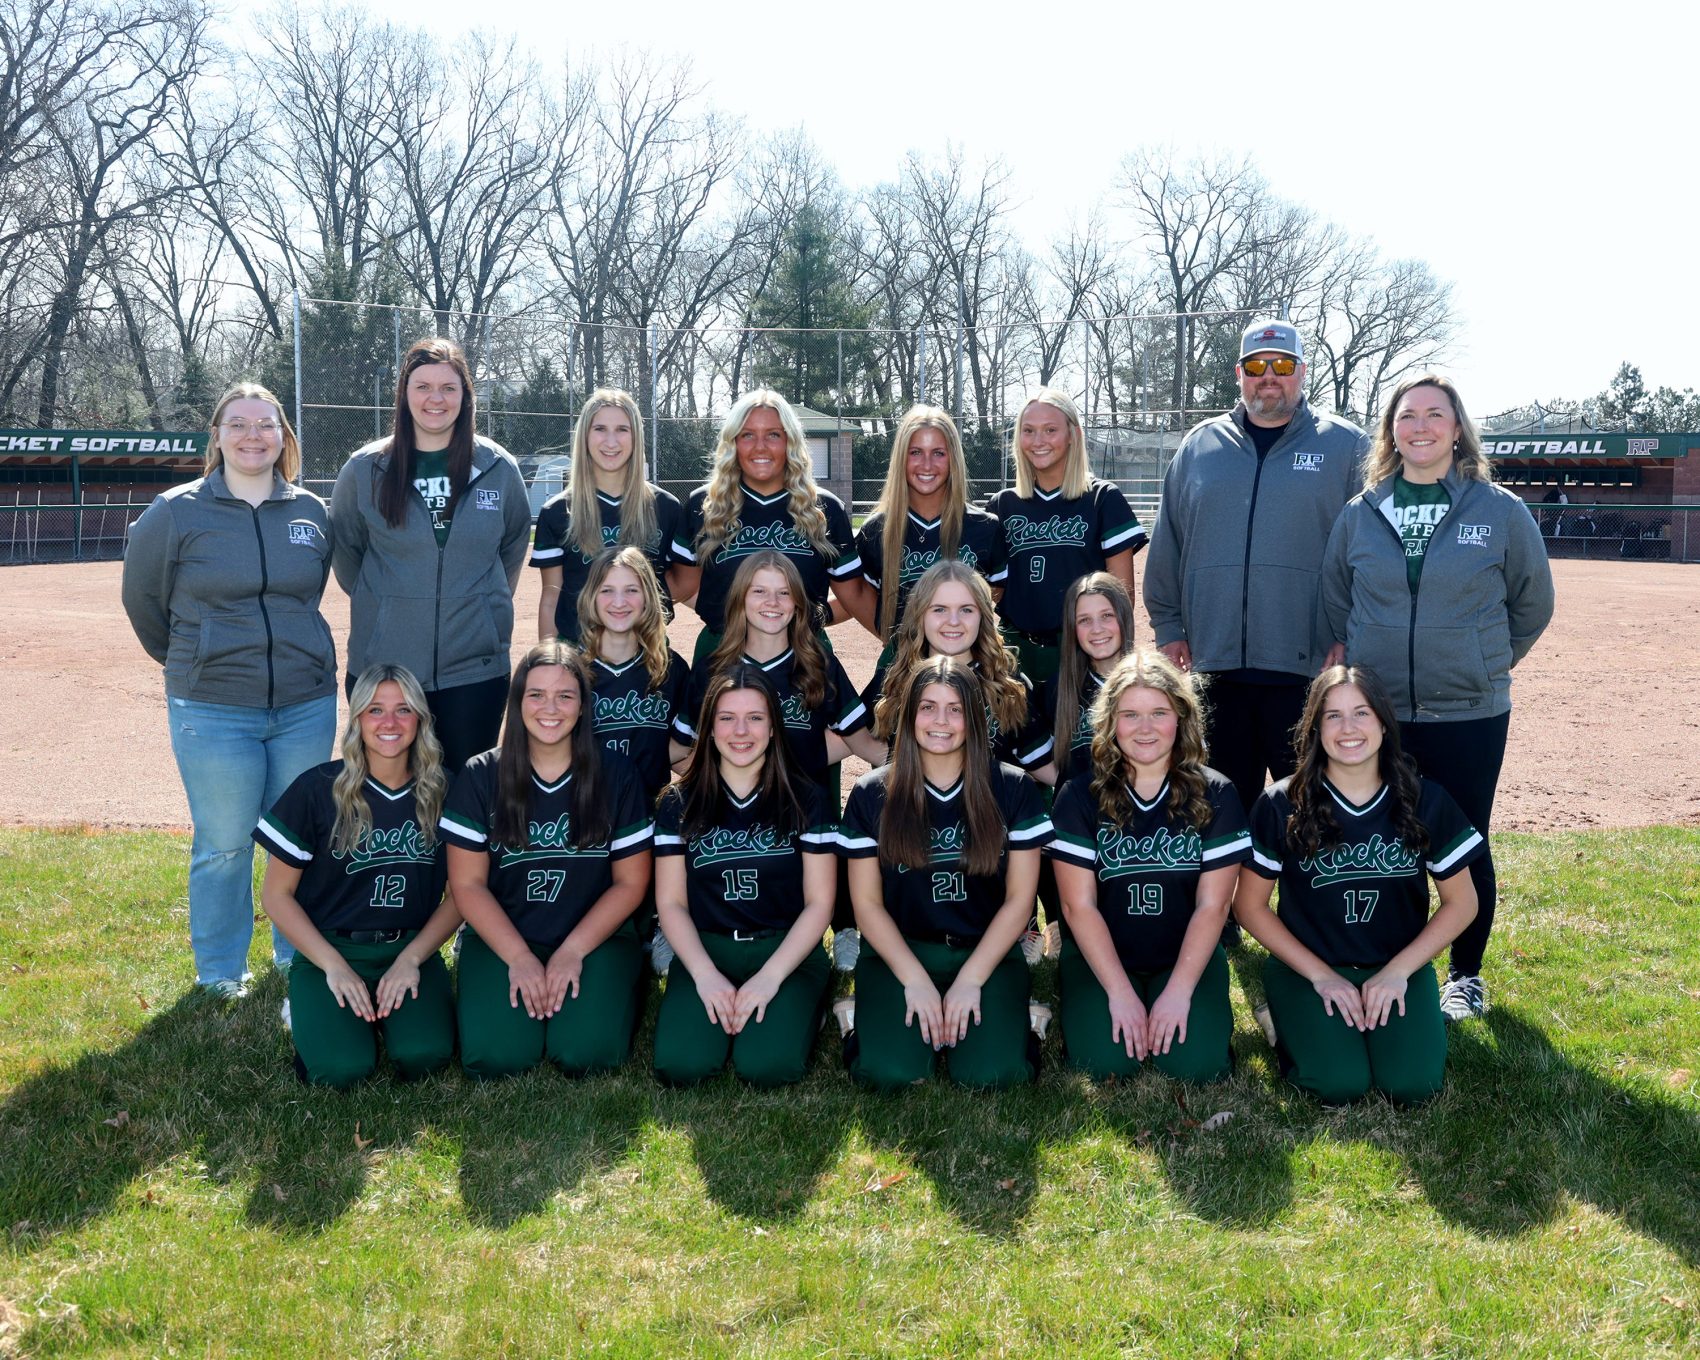 Reeths-Puffer takes down Holland in both ends of a softball doubleheader